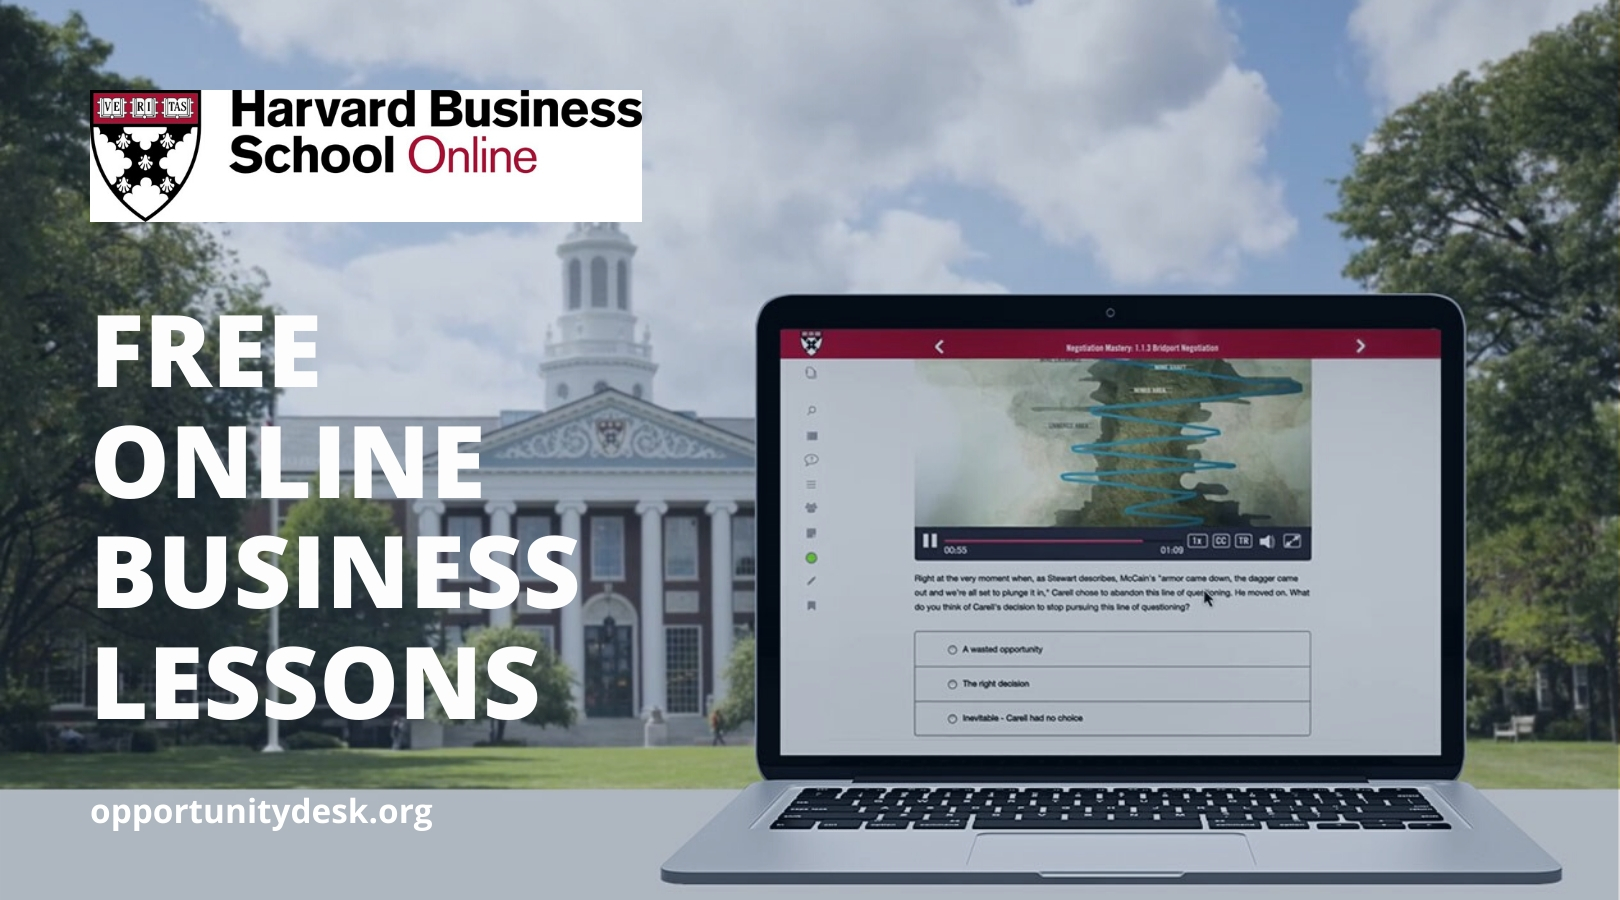 Harvard Business School Online (HBSO) FREE Business Lessons 2020